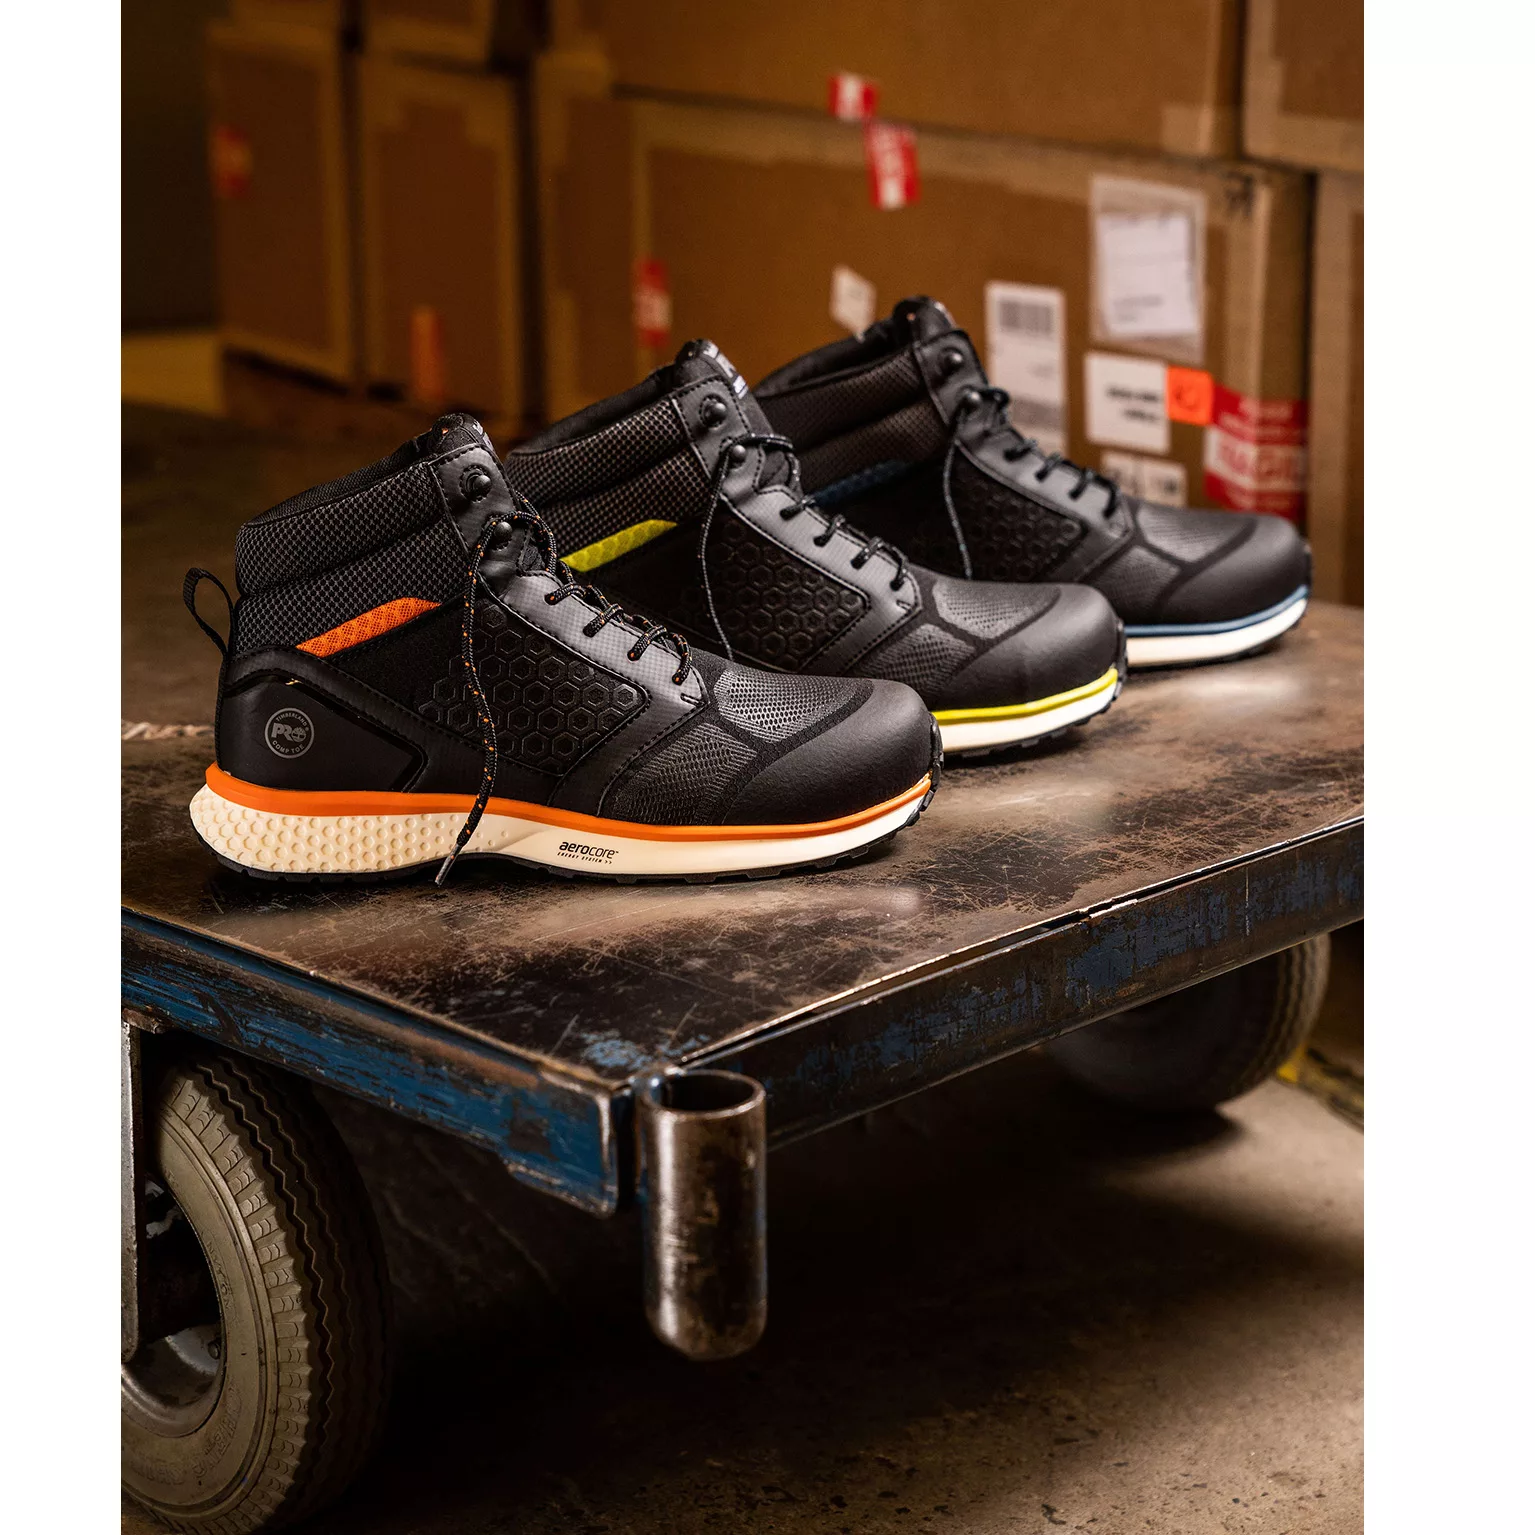 Symptomen binden speler BASF polyurethane powers new Aerocore Energy System in the Timberland PRO  Reaxion safety shoe